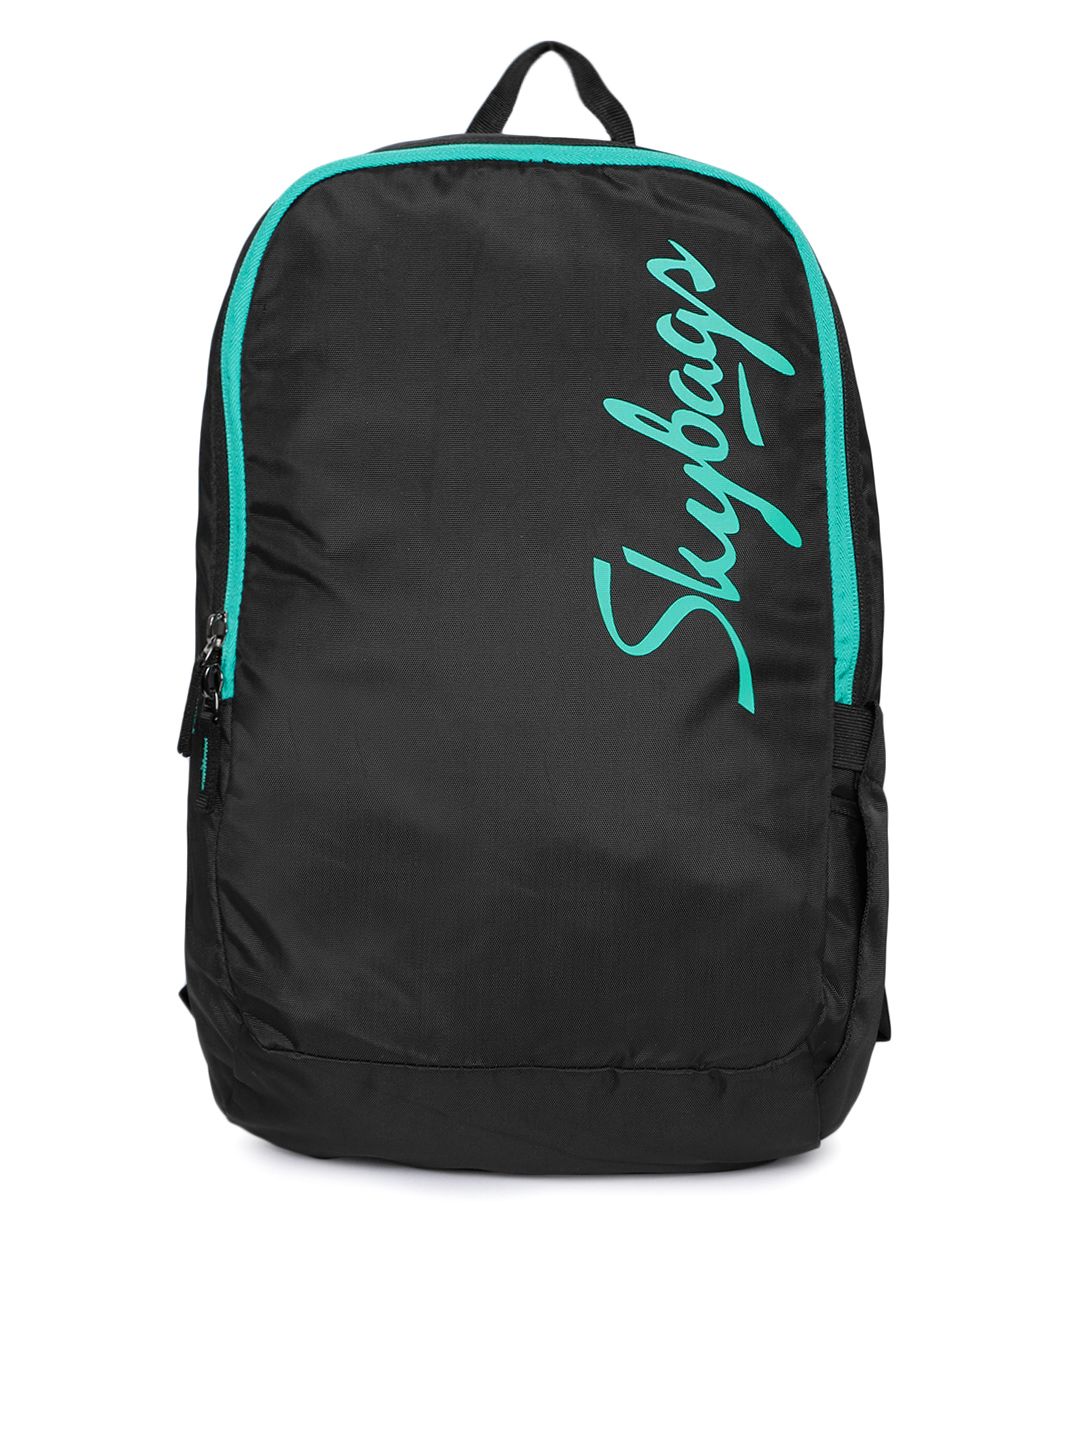 Skybags Unisex Black Brand Logo Backpack Price in India